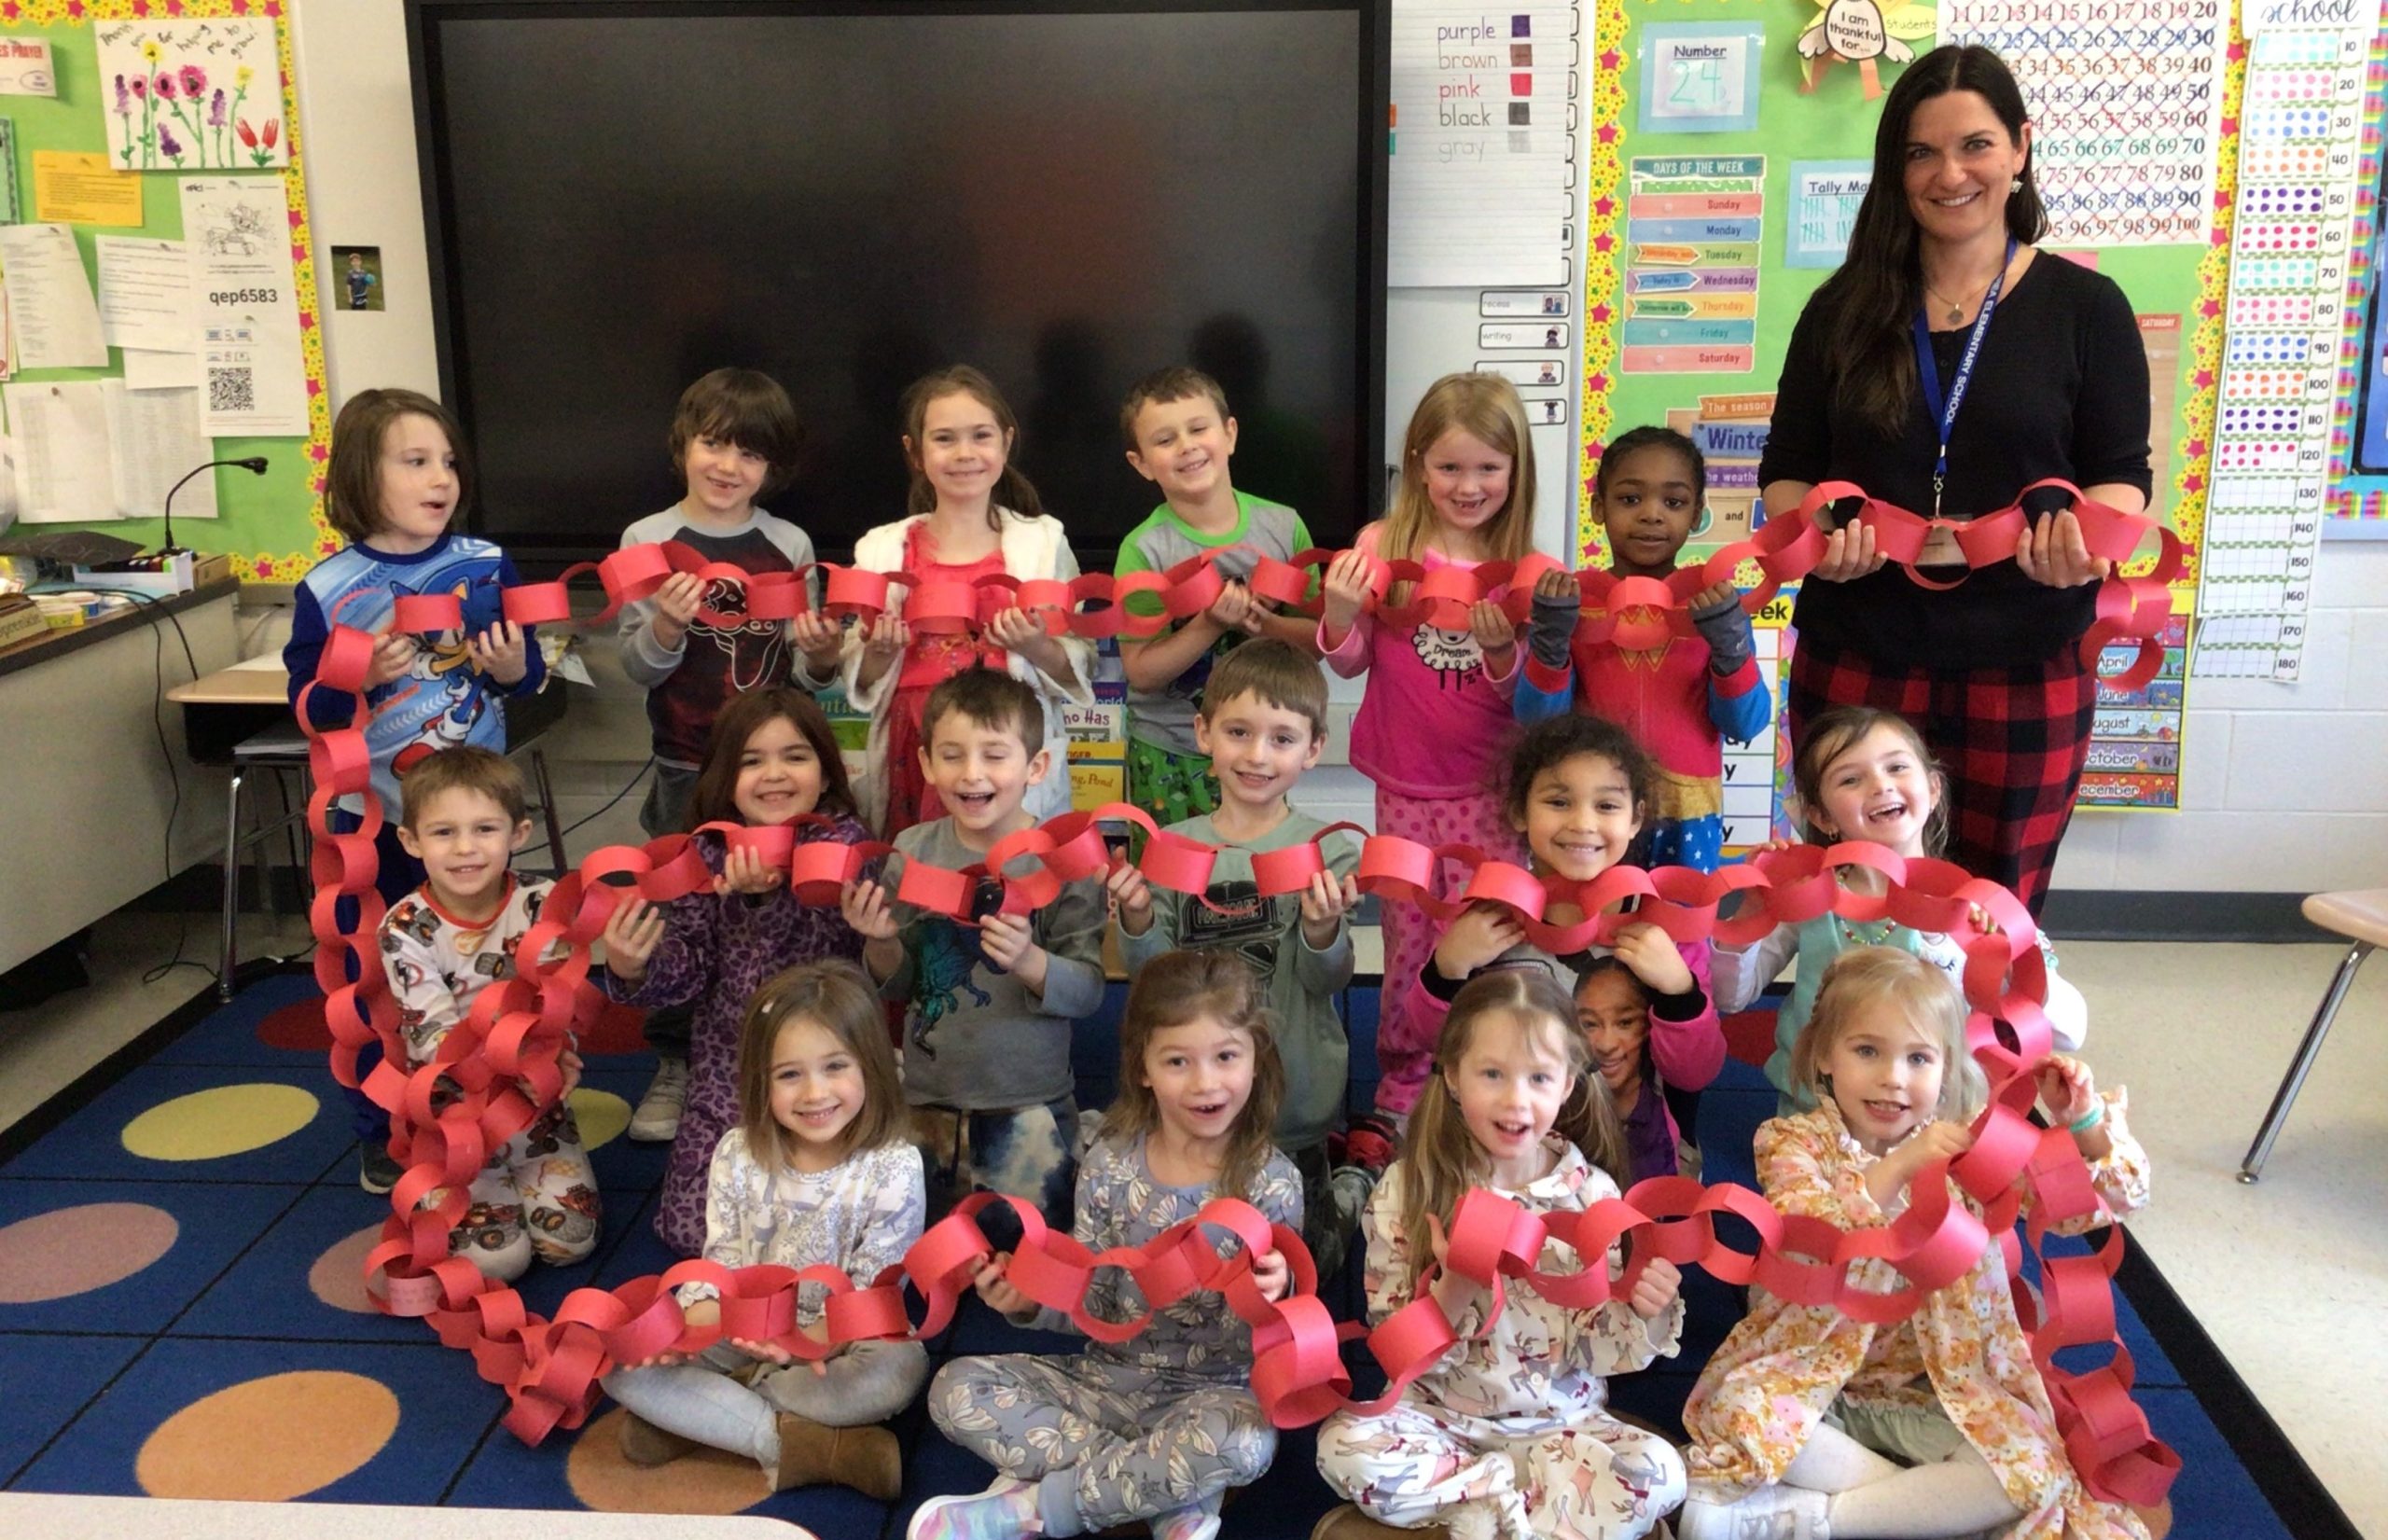 Students at the elementary school were challanged to demonstrate random acts of kindness and earn as many chain links as they could throughout the month of February.  Mrs. Sprenke’s class collected the most chain links – 156